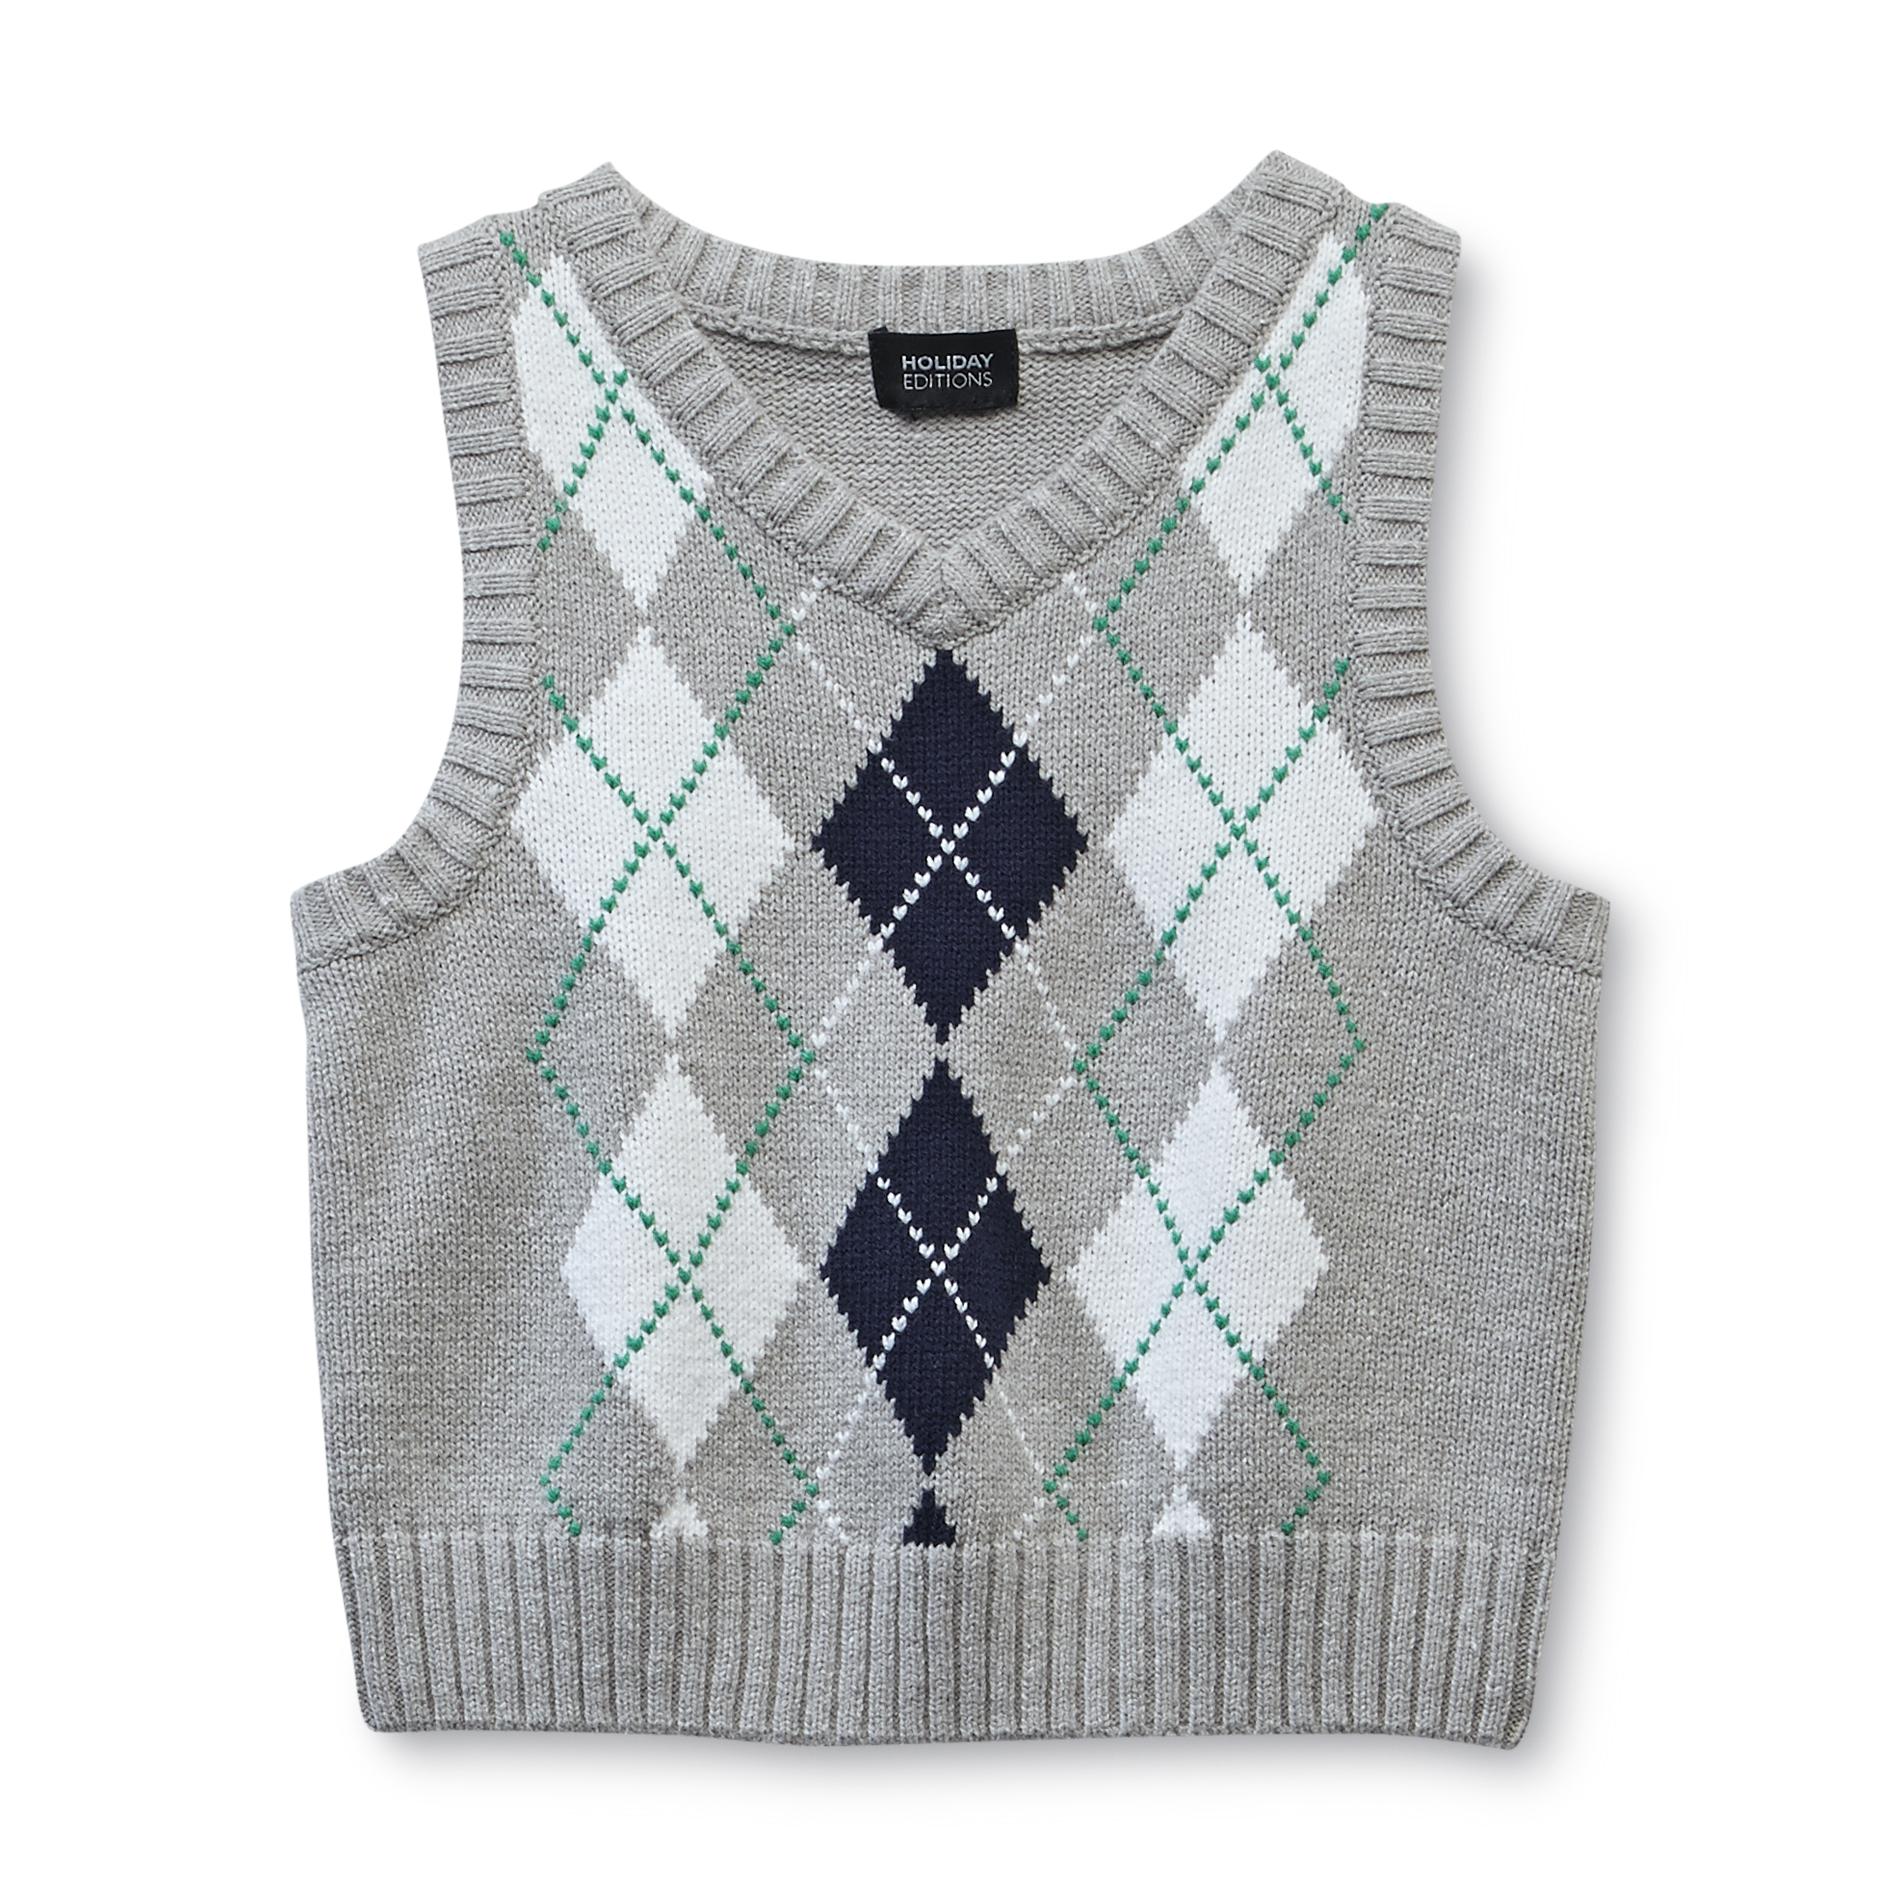 Holiday Editions Infant & Toddler Boy's Knit Sweater Vest - Argyle